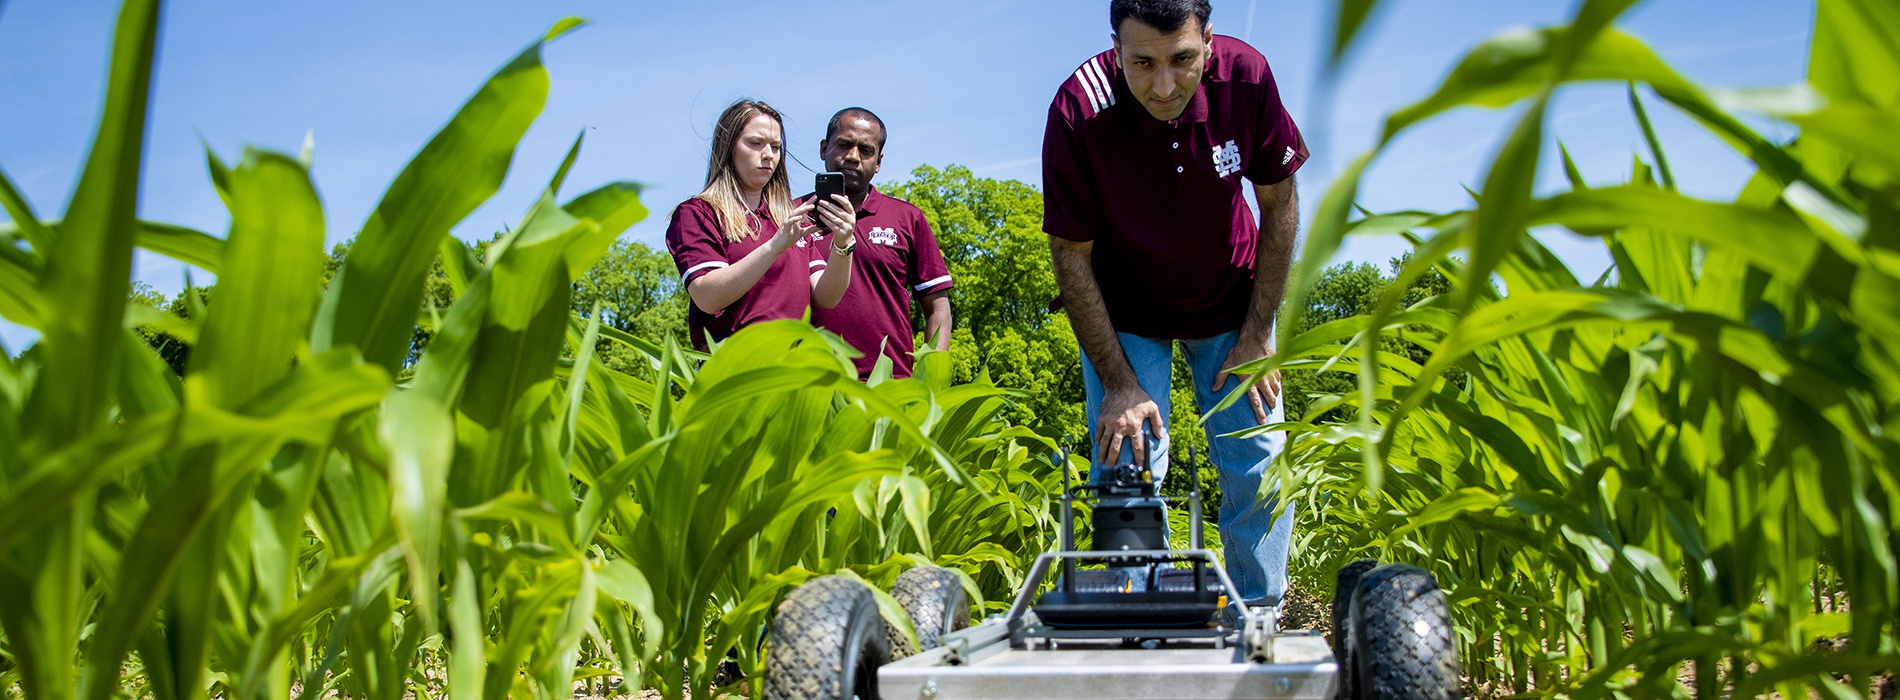 3 researchers using remote rover in field.